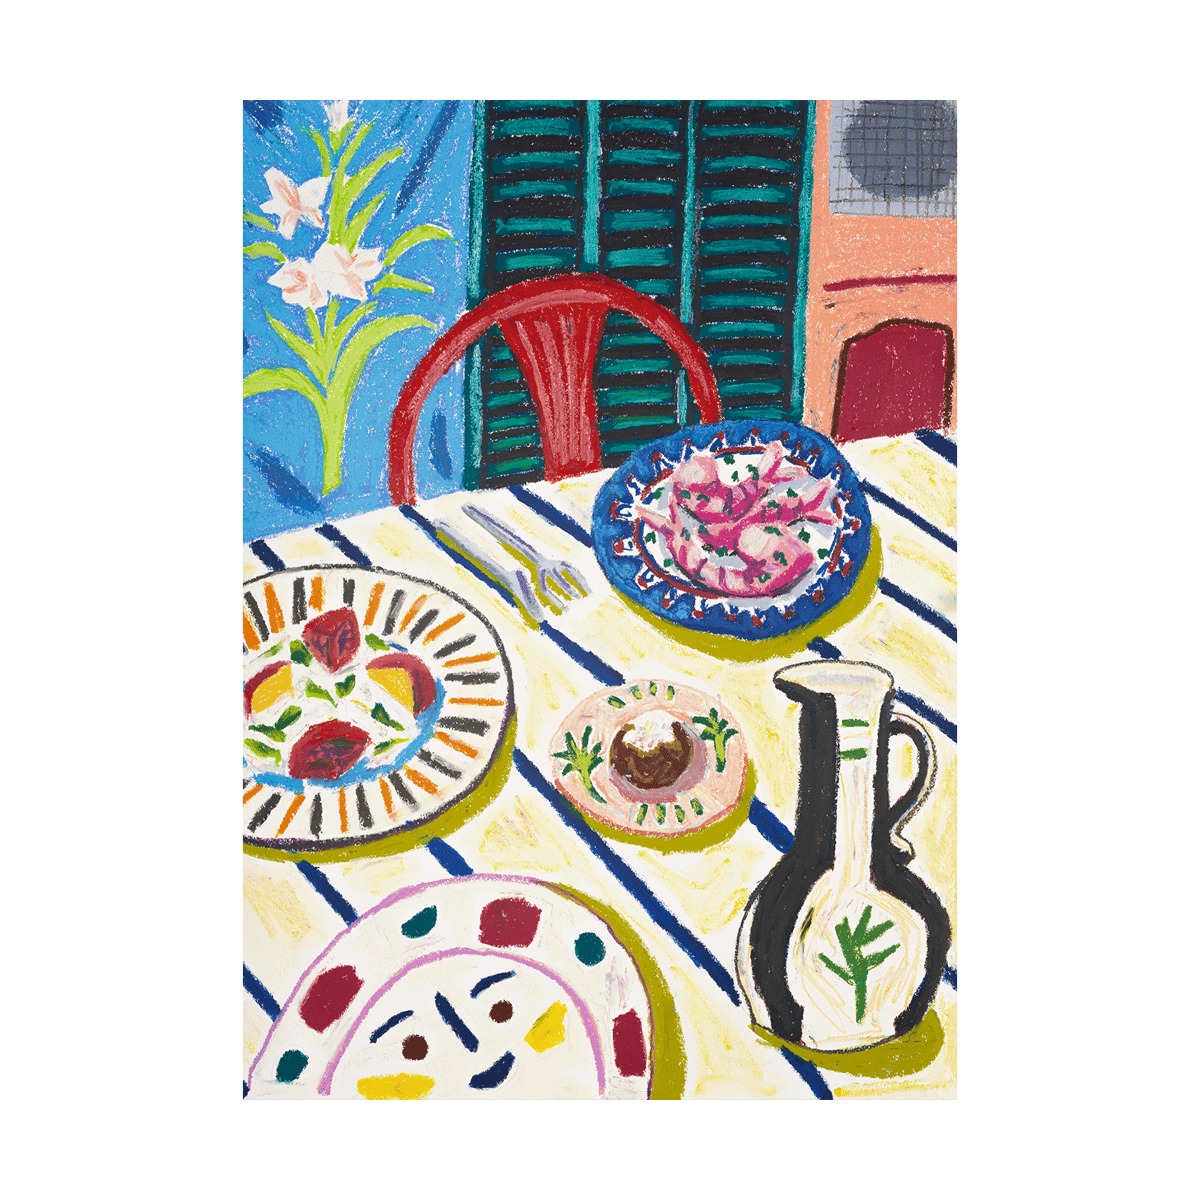 Paper Collective Tapas Dinner poster 70x100 cm